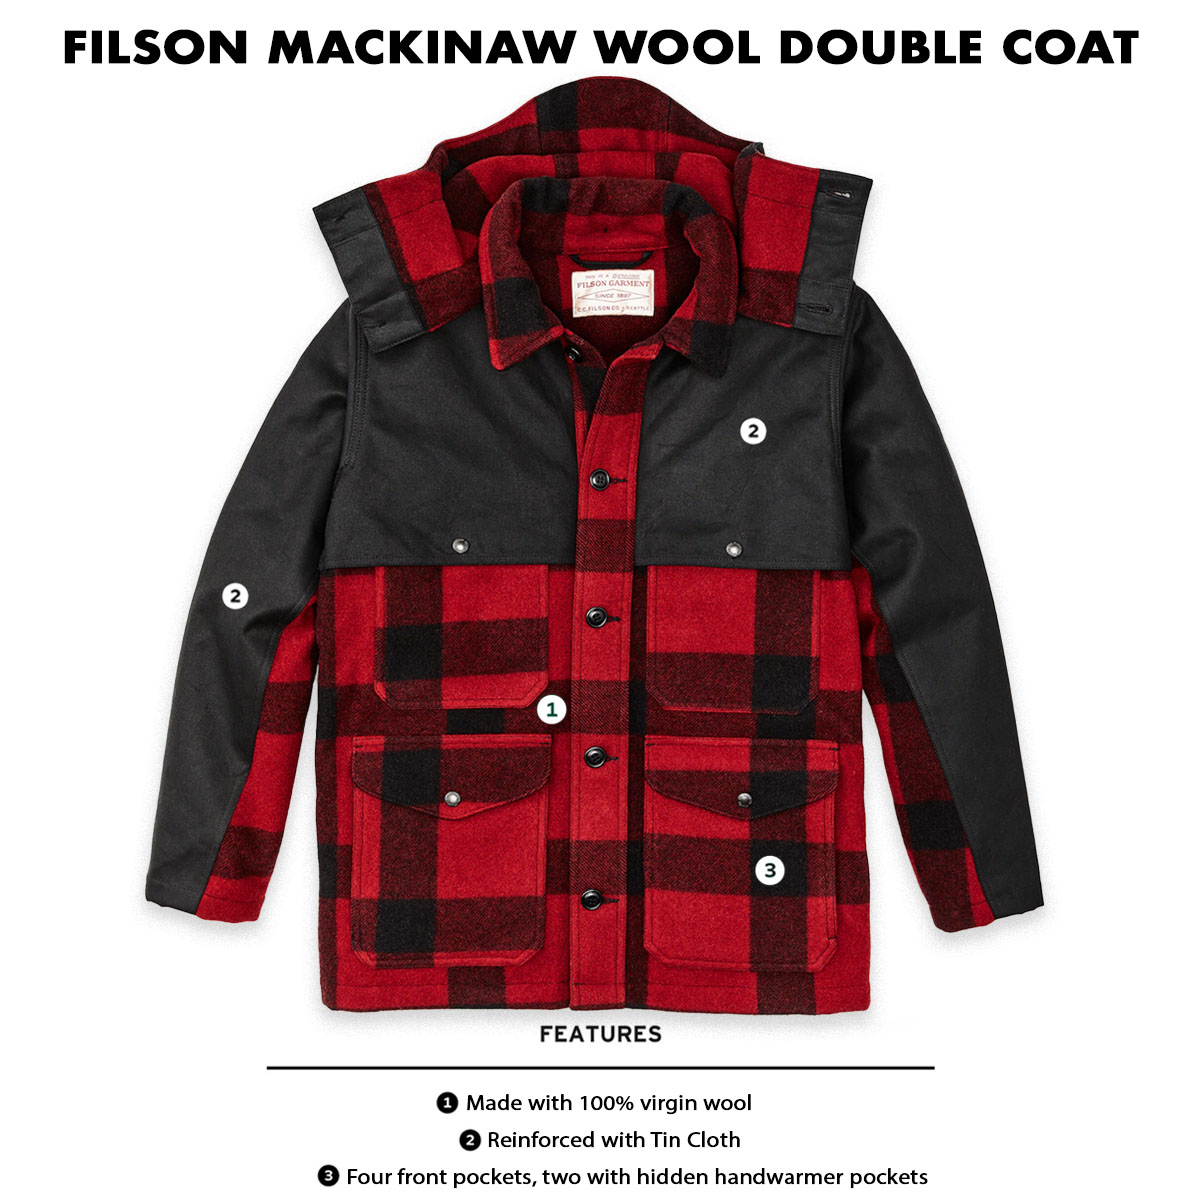 Filson Mackinaw Wool Double Coat Red Black Classic Plaid, features